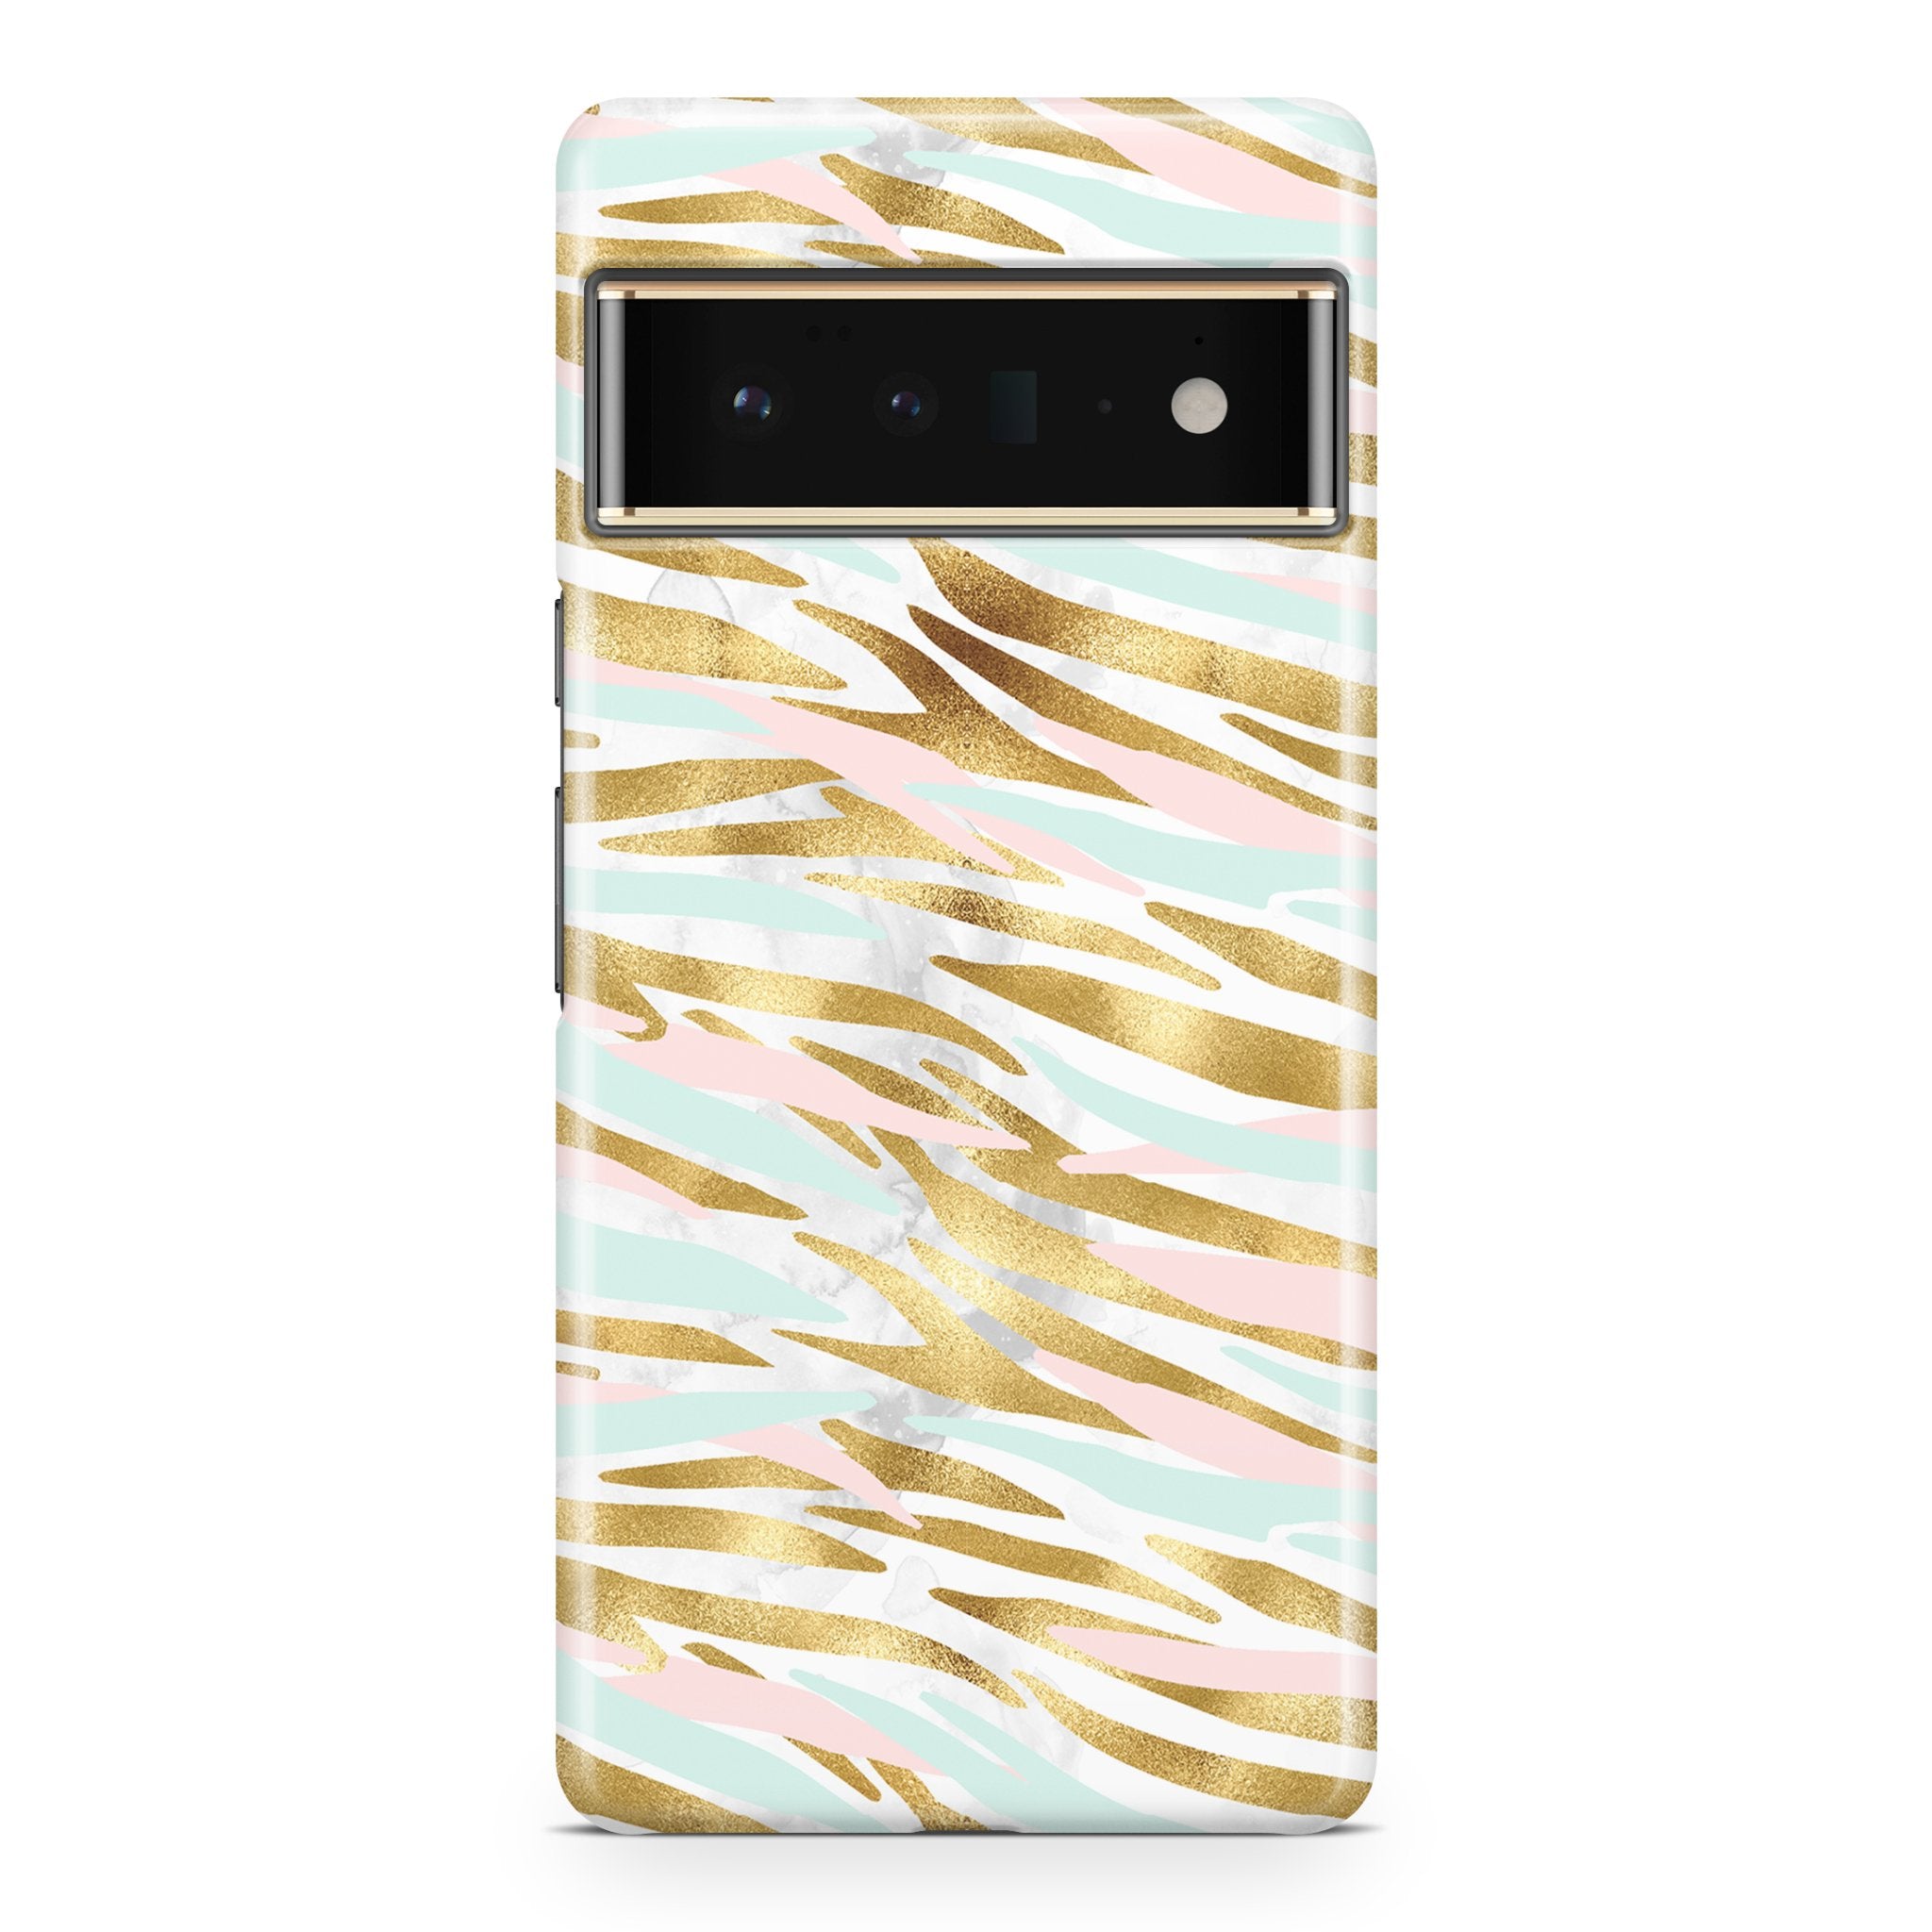 Mint Pink Gold Tiger Stripe - Google phone case designs by CaseSwagger